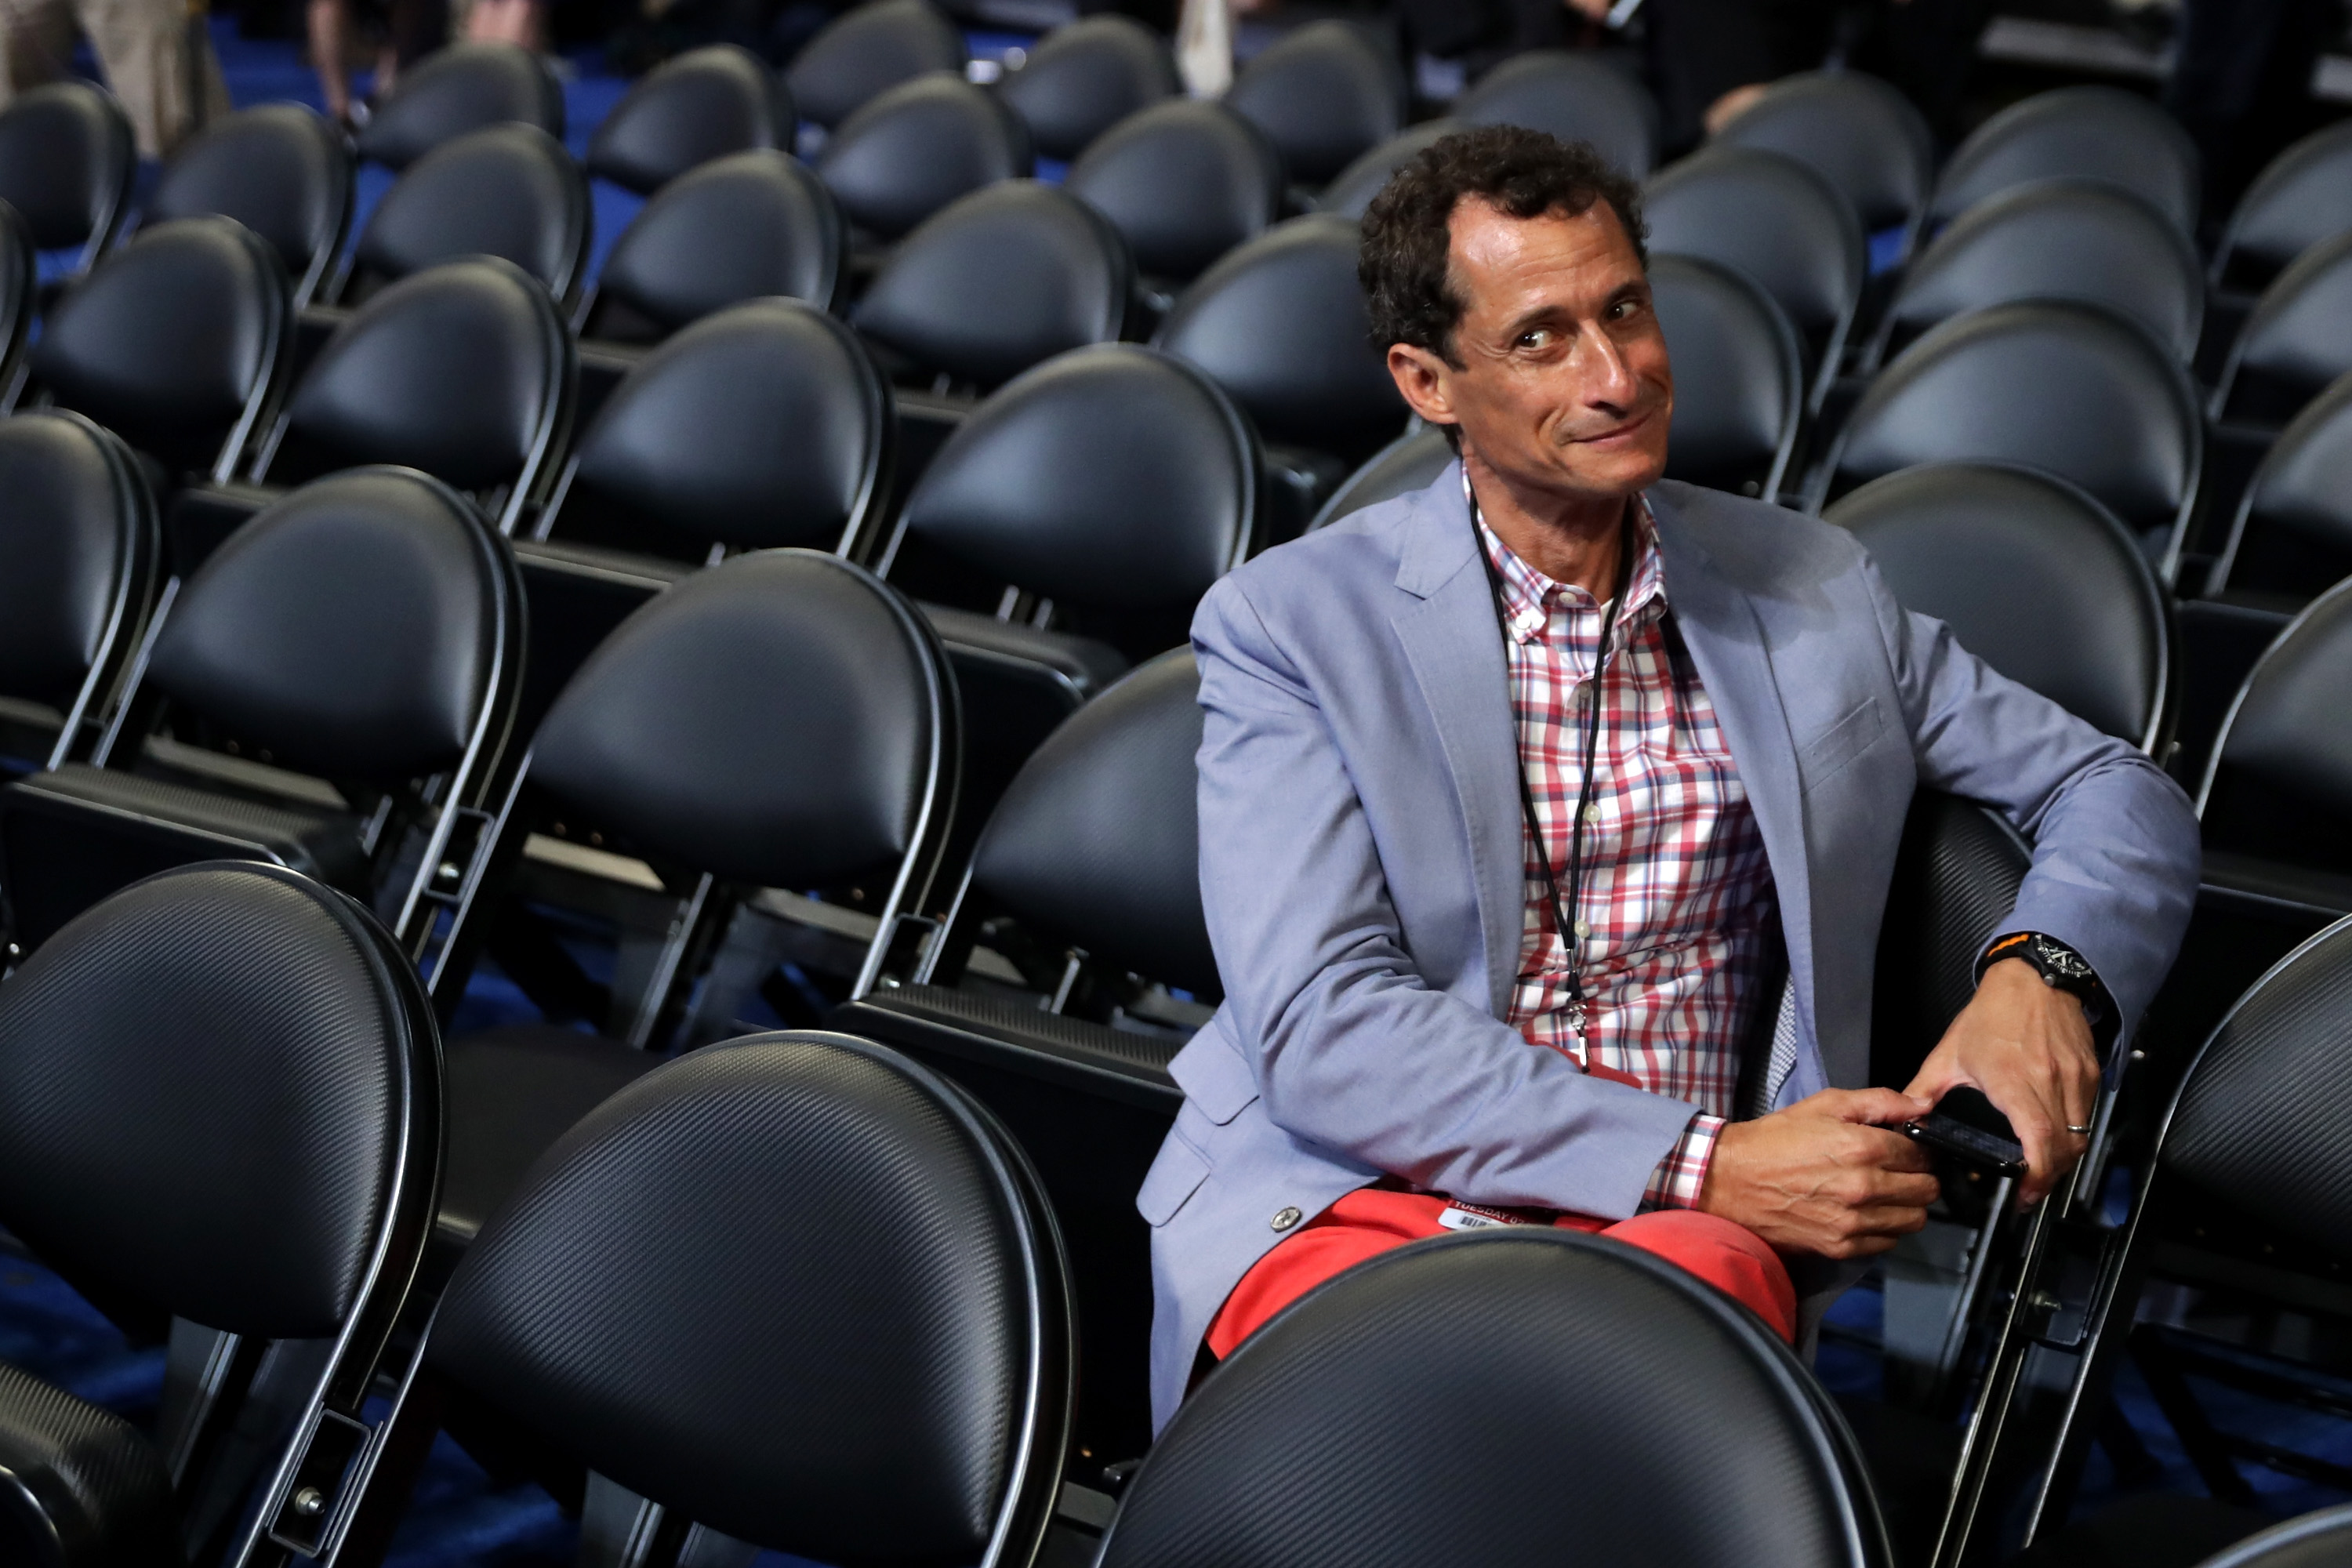 Anthony Weiner on July 26, 2016 in Philadelphia, PA. (Chip Somodevilla—Getty Images)